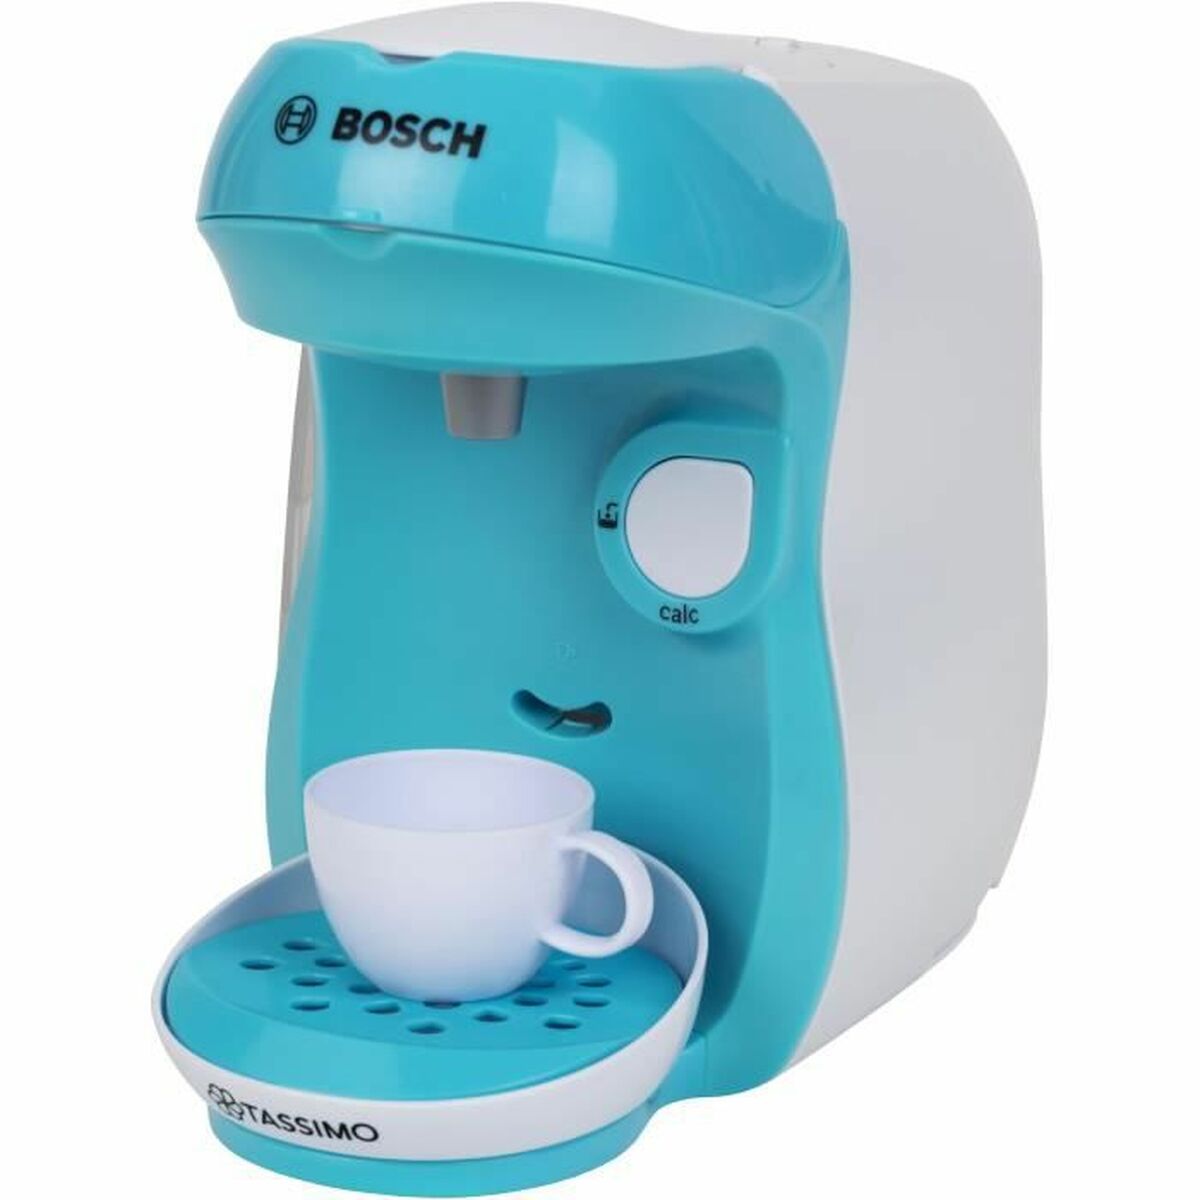 Toy Appliance Klein Bosch + 3 years Accessories Electric Coffee-maker